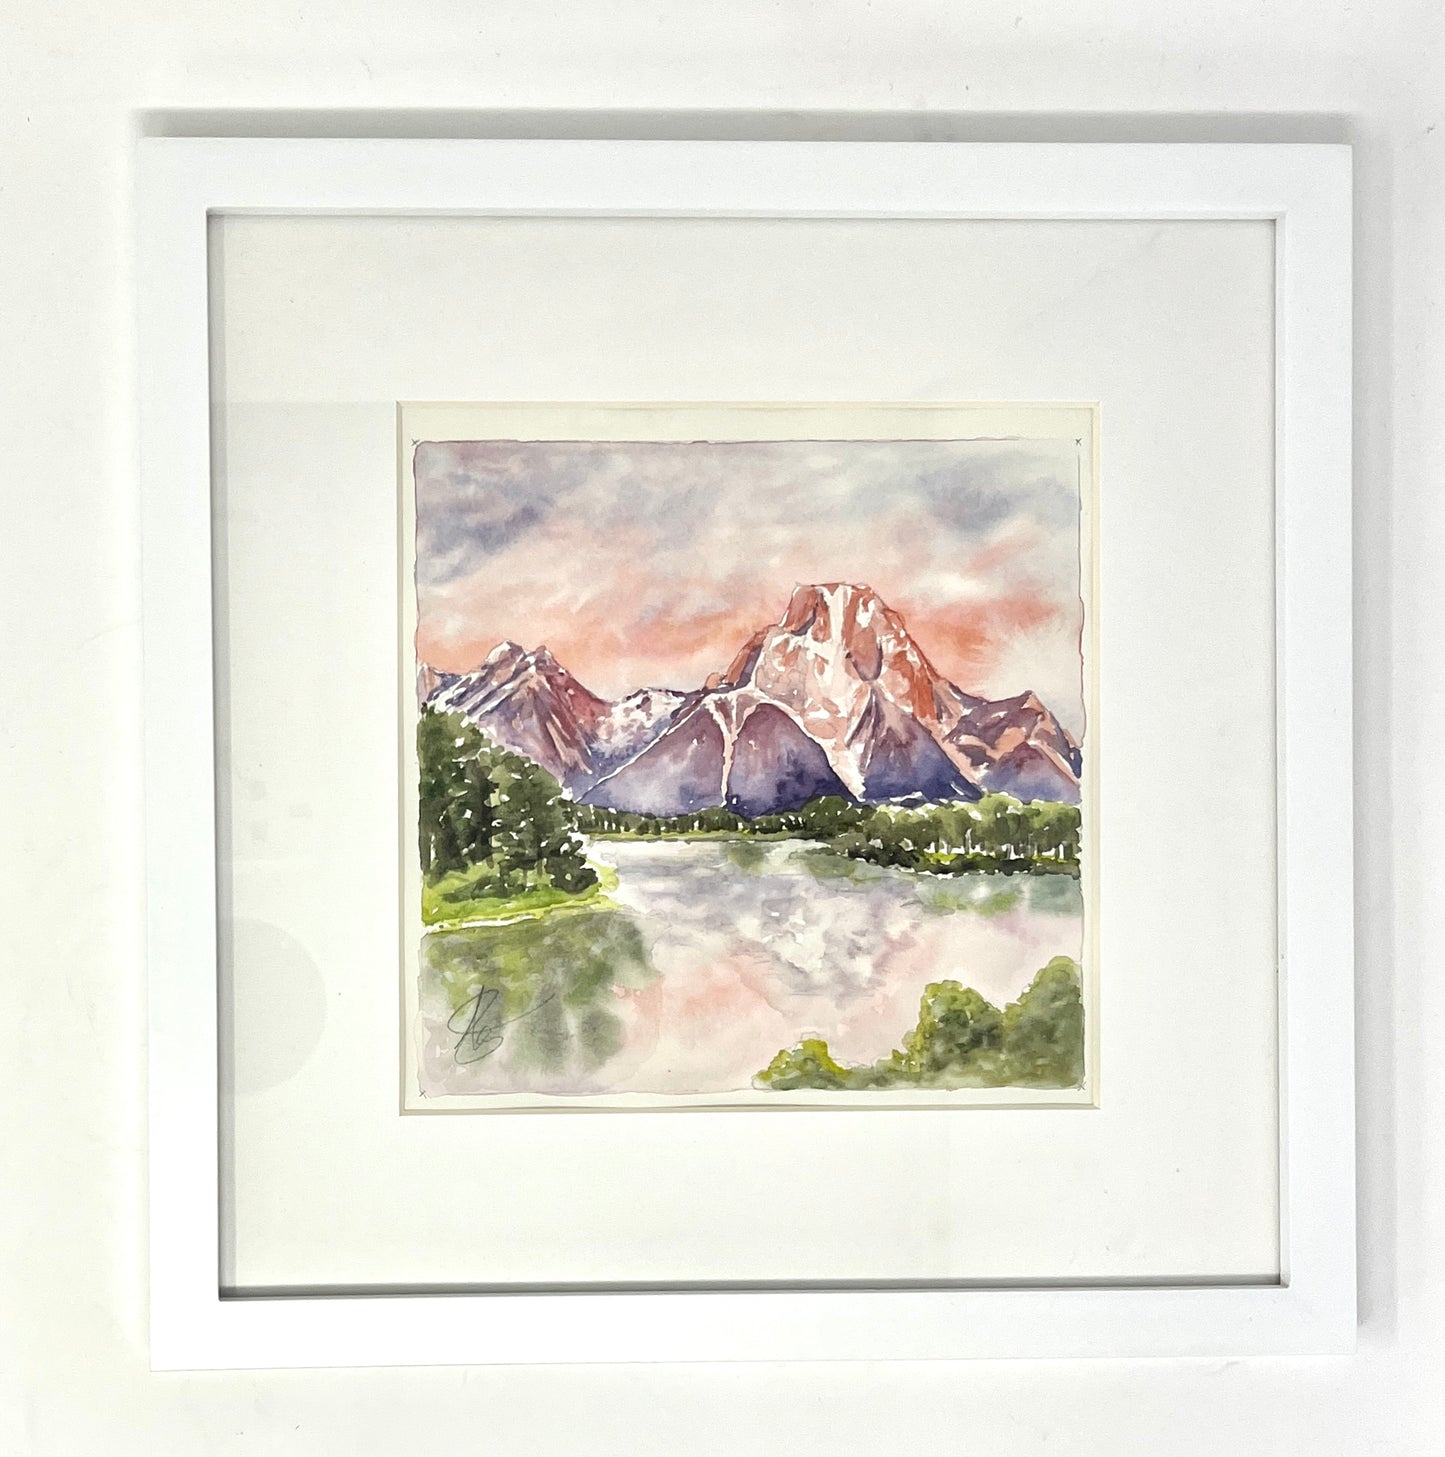 Natalie Connell: Watercolor 9 x 9 inches (framed)